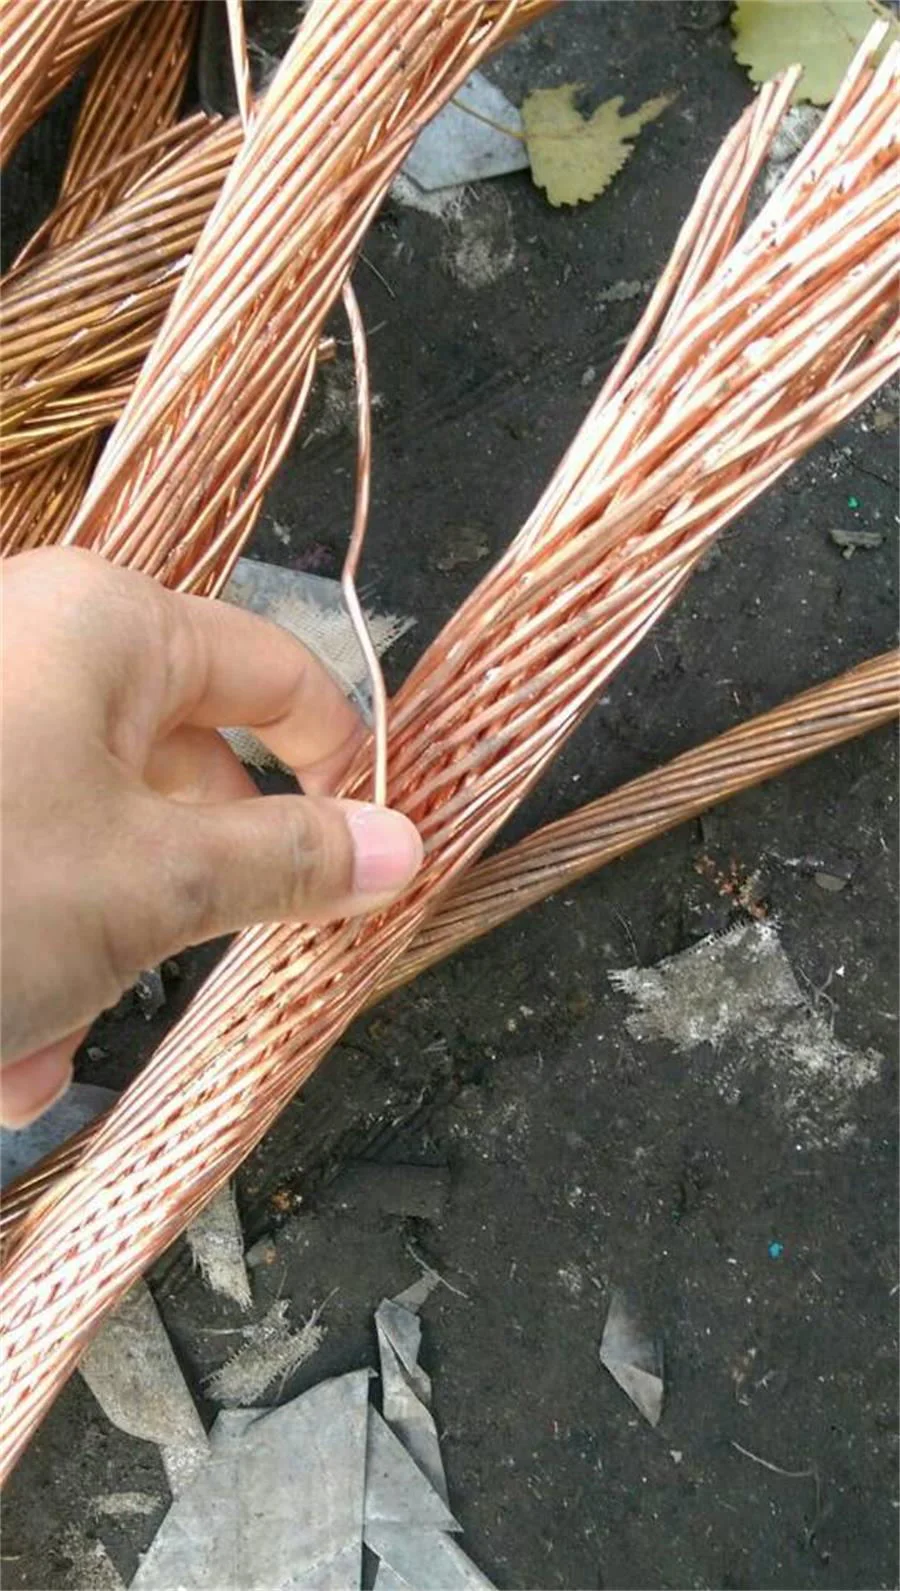 Scrap Copper Wire Copper Wire Copper Scrap Copper Scrap Wire Cathode Copper Copper Cathode Buyers Traders